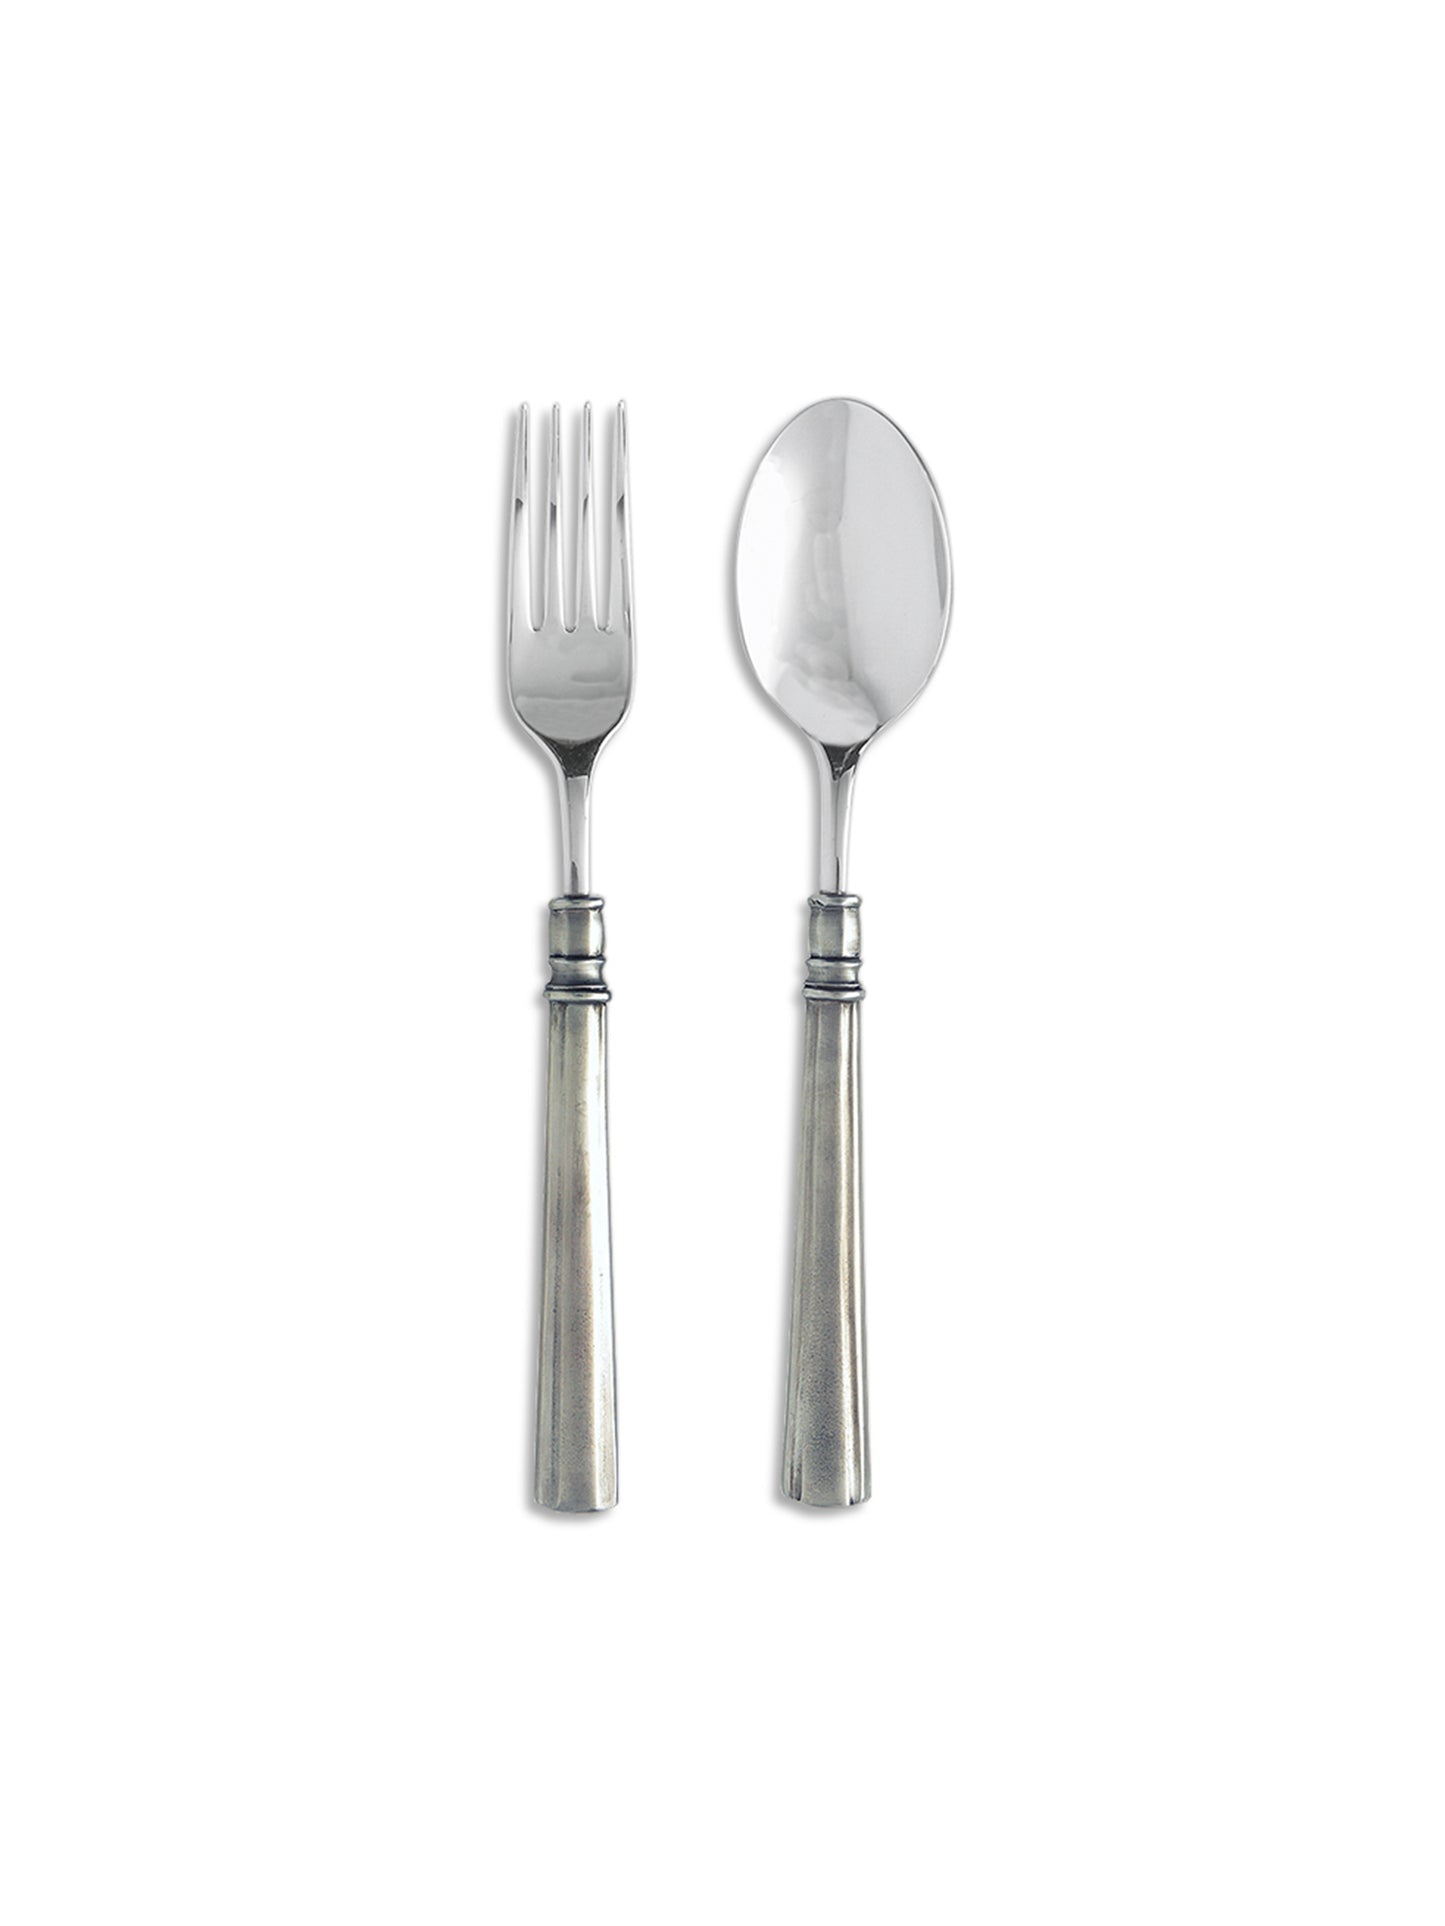 MATCH Pewter Lucia Serving Fork & Spoon Weston Table